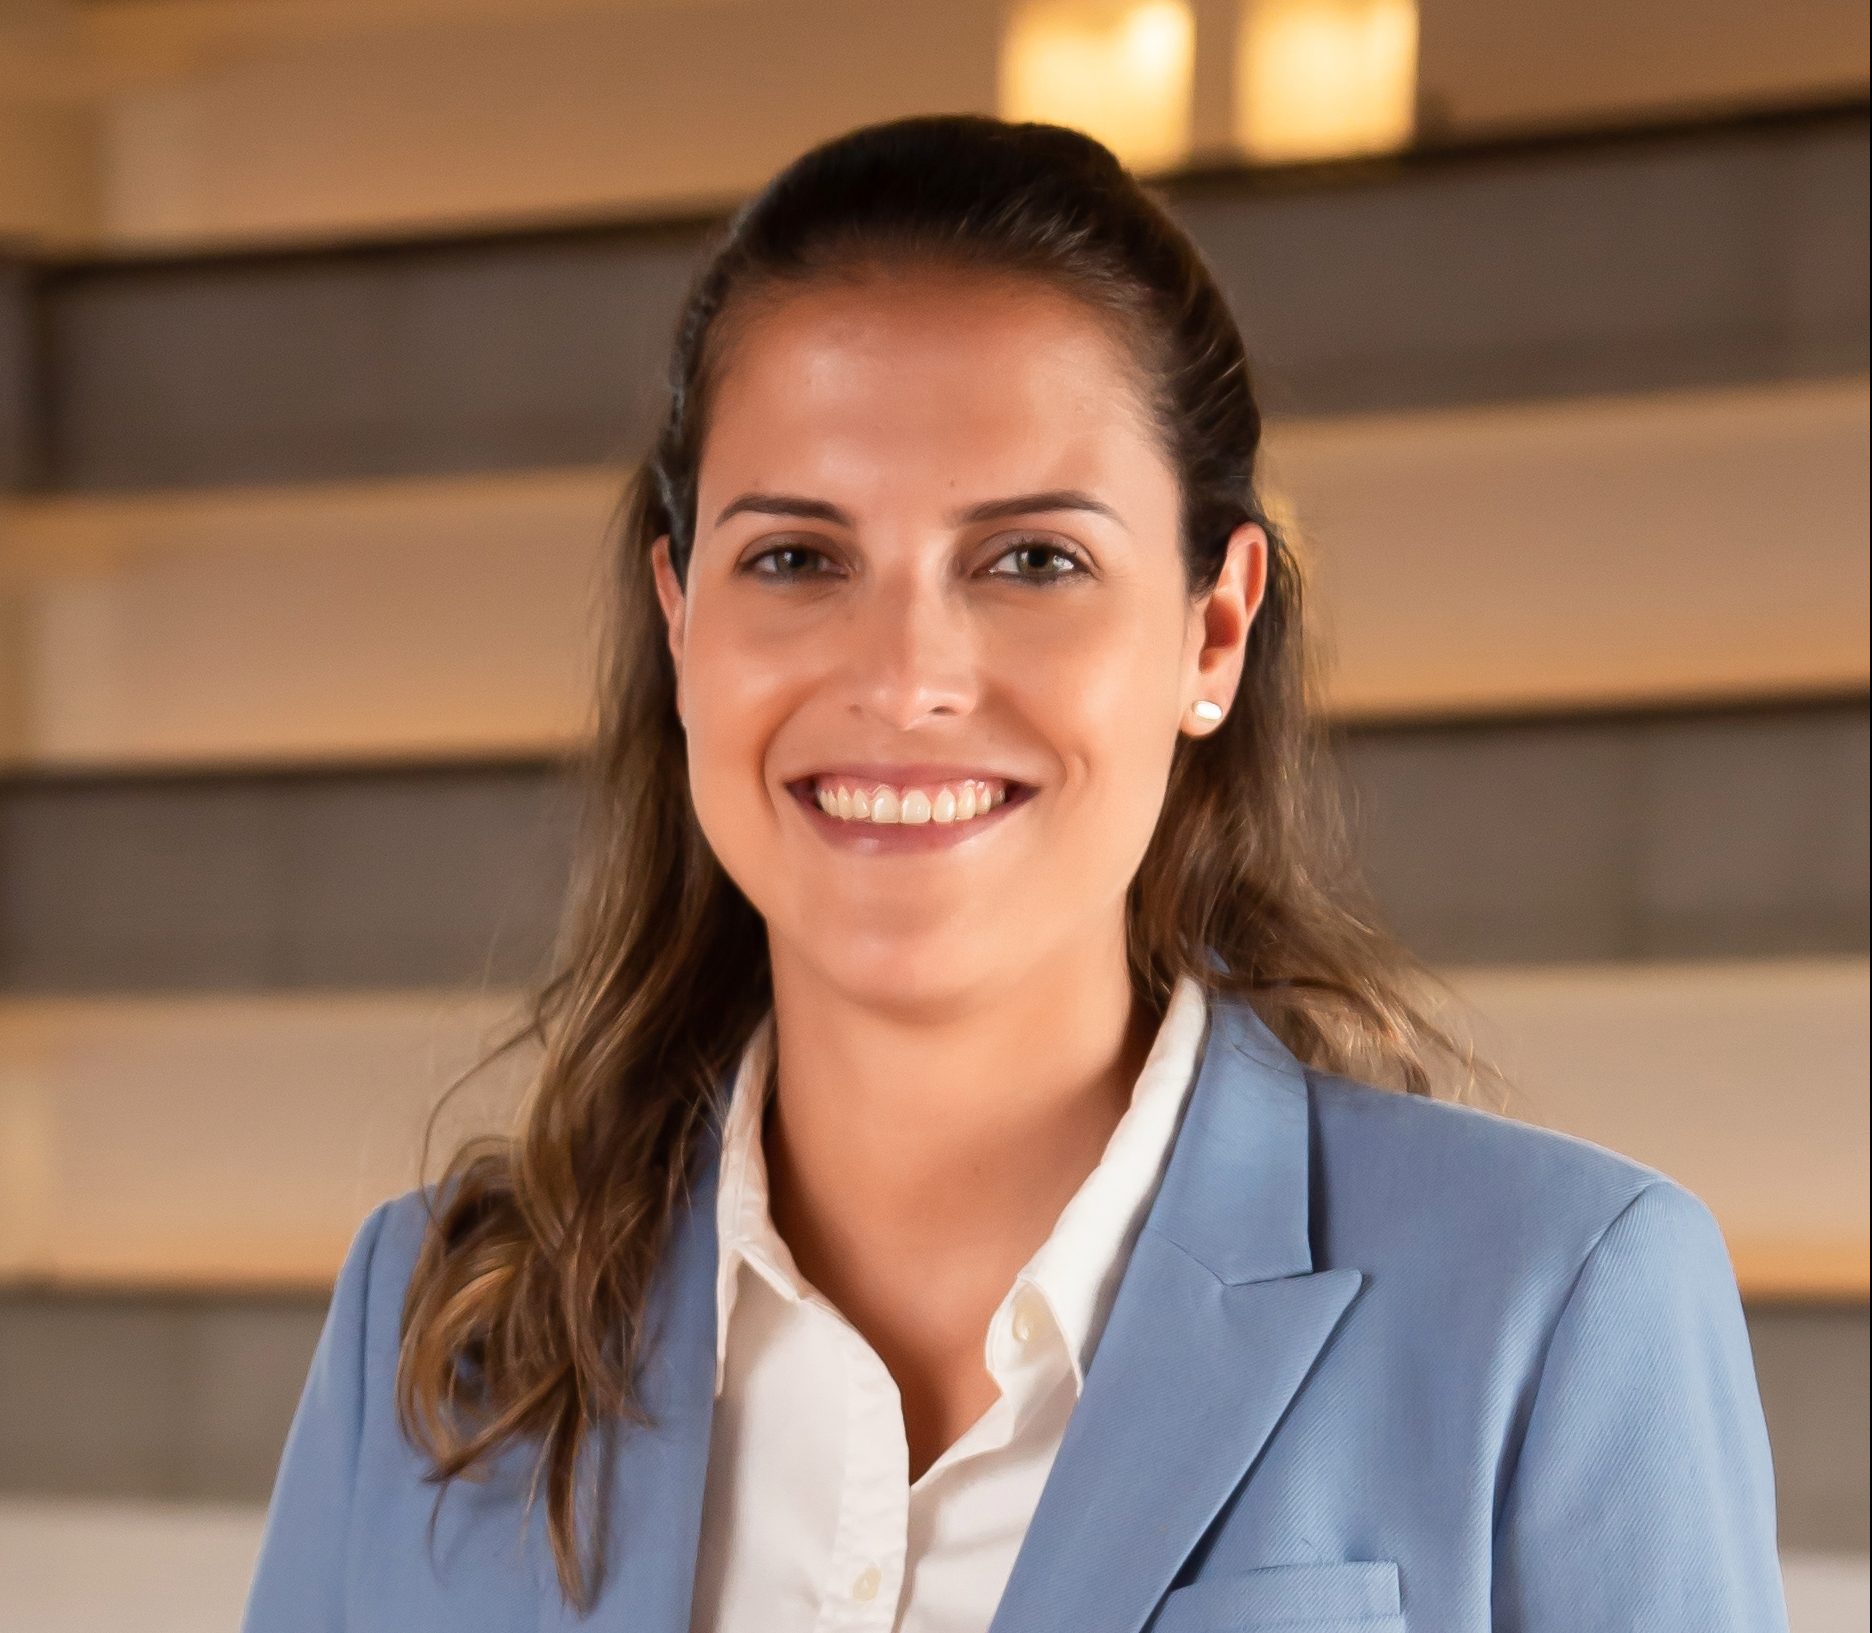 Customer Experience Radio Welcomes Hotelier and Director of Operational Excellence Leticia Tavares